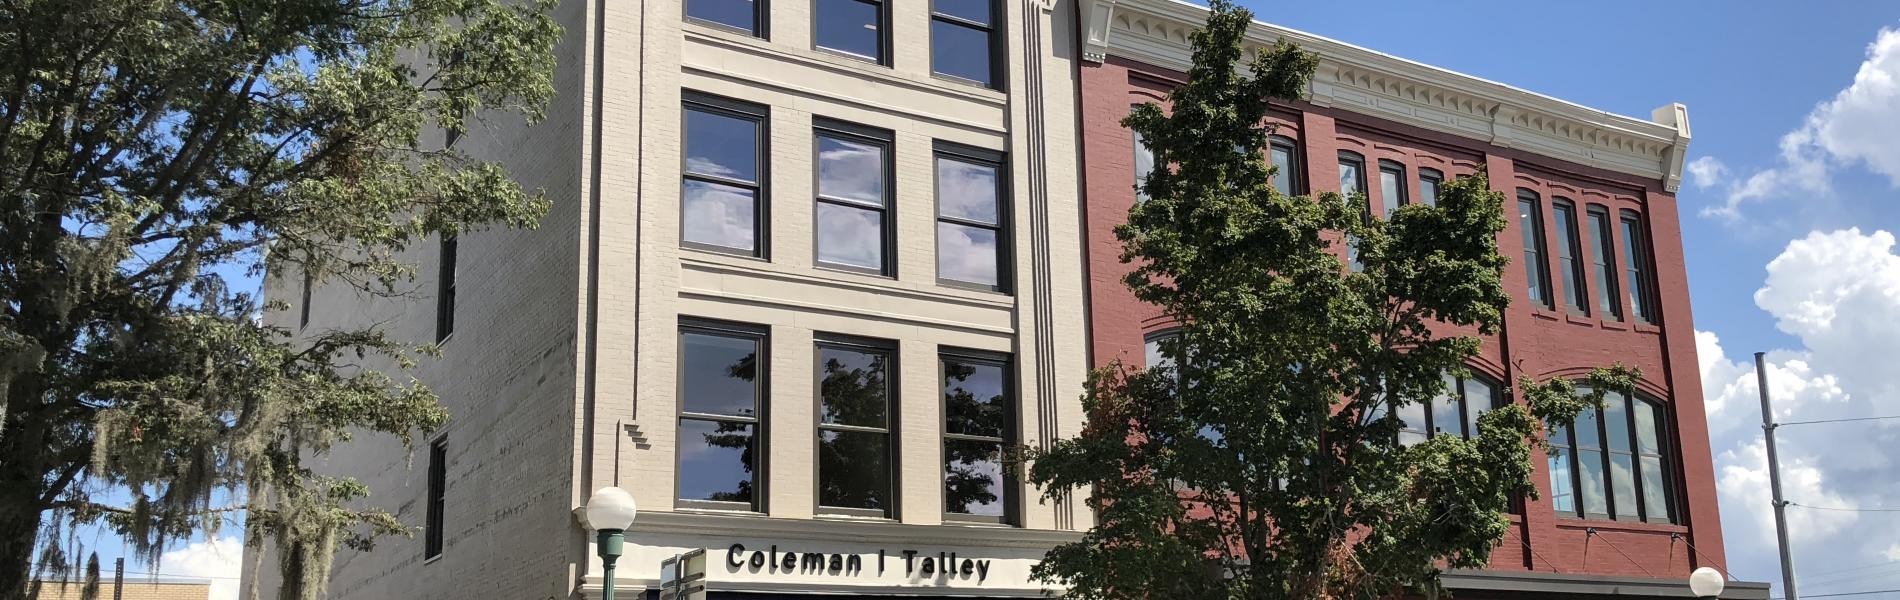 Coleman Talley Building